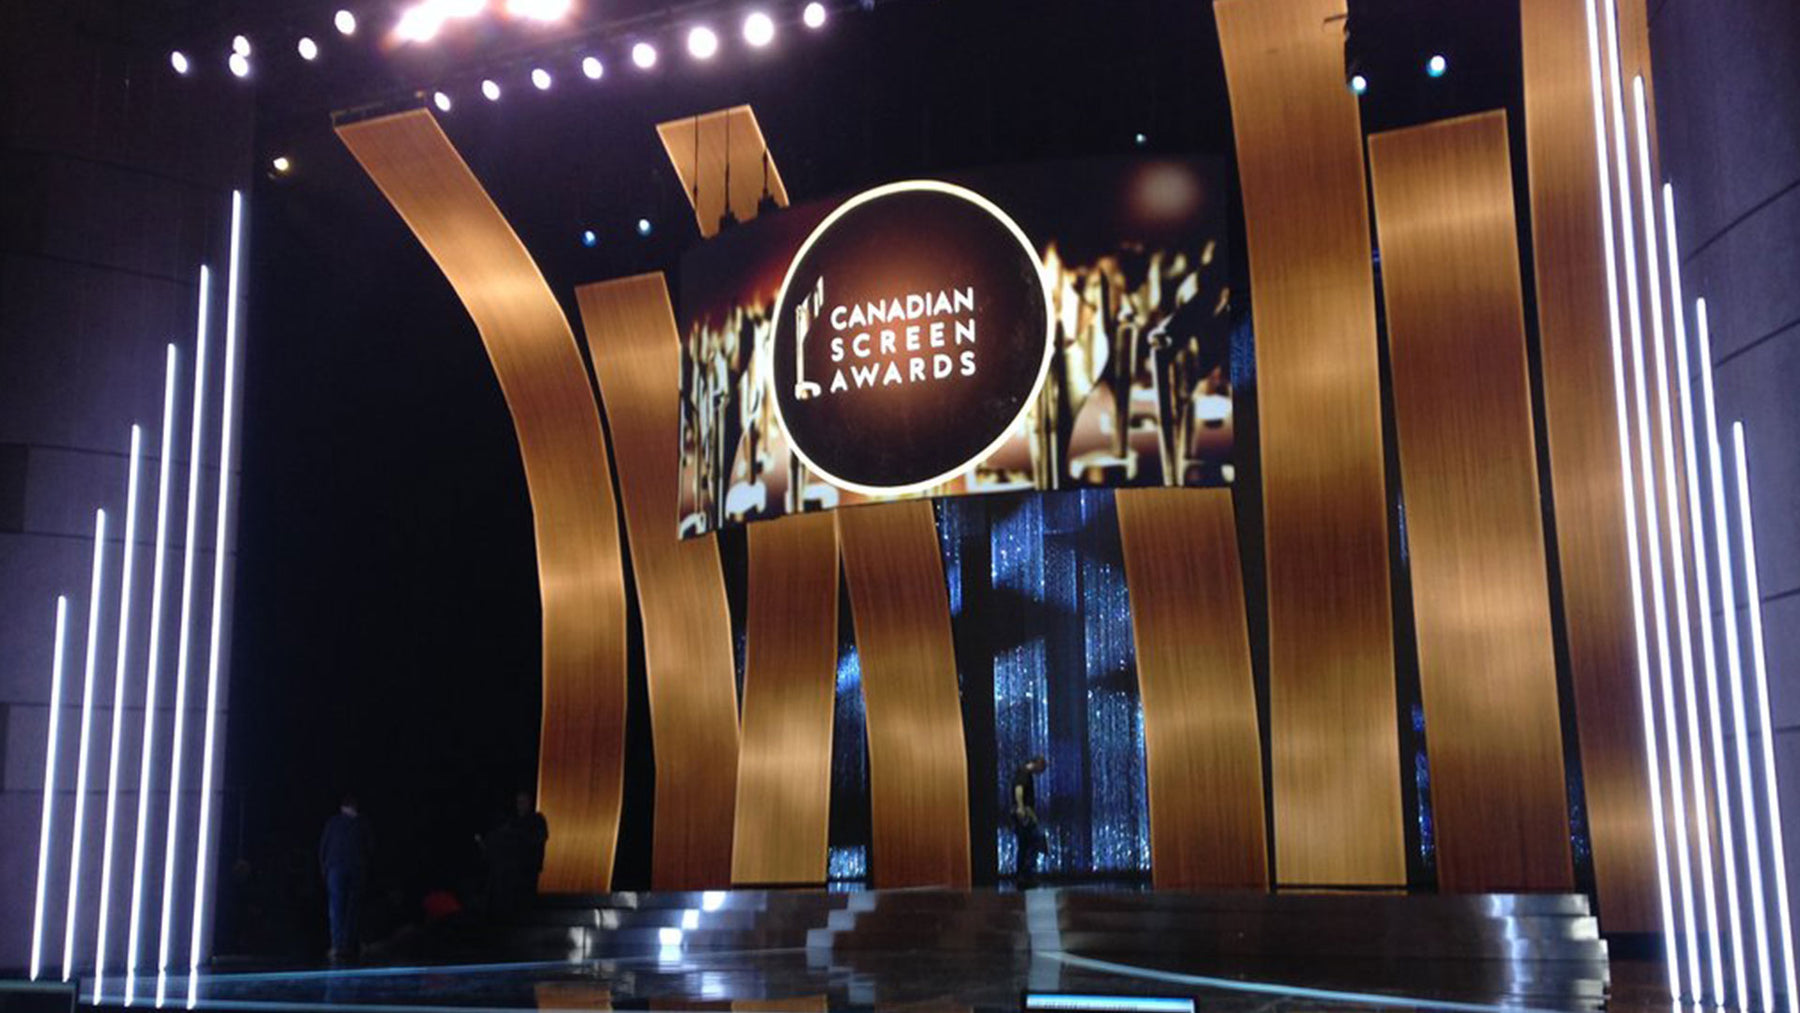 Moss LED on the Canadian Screen Awards